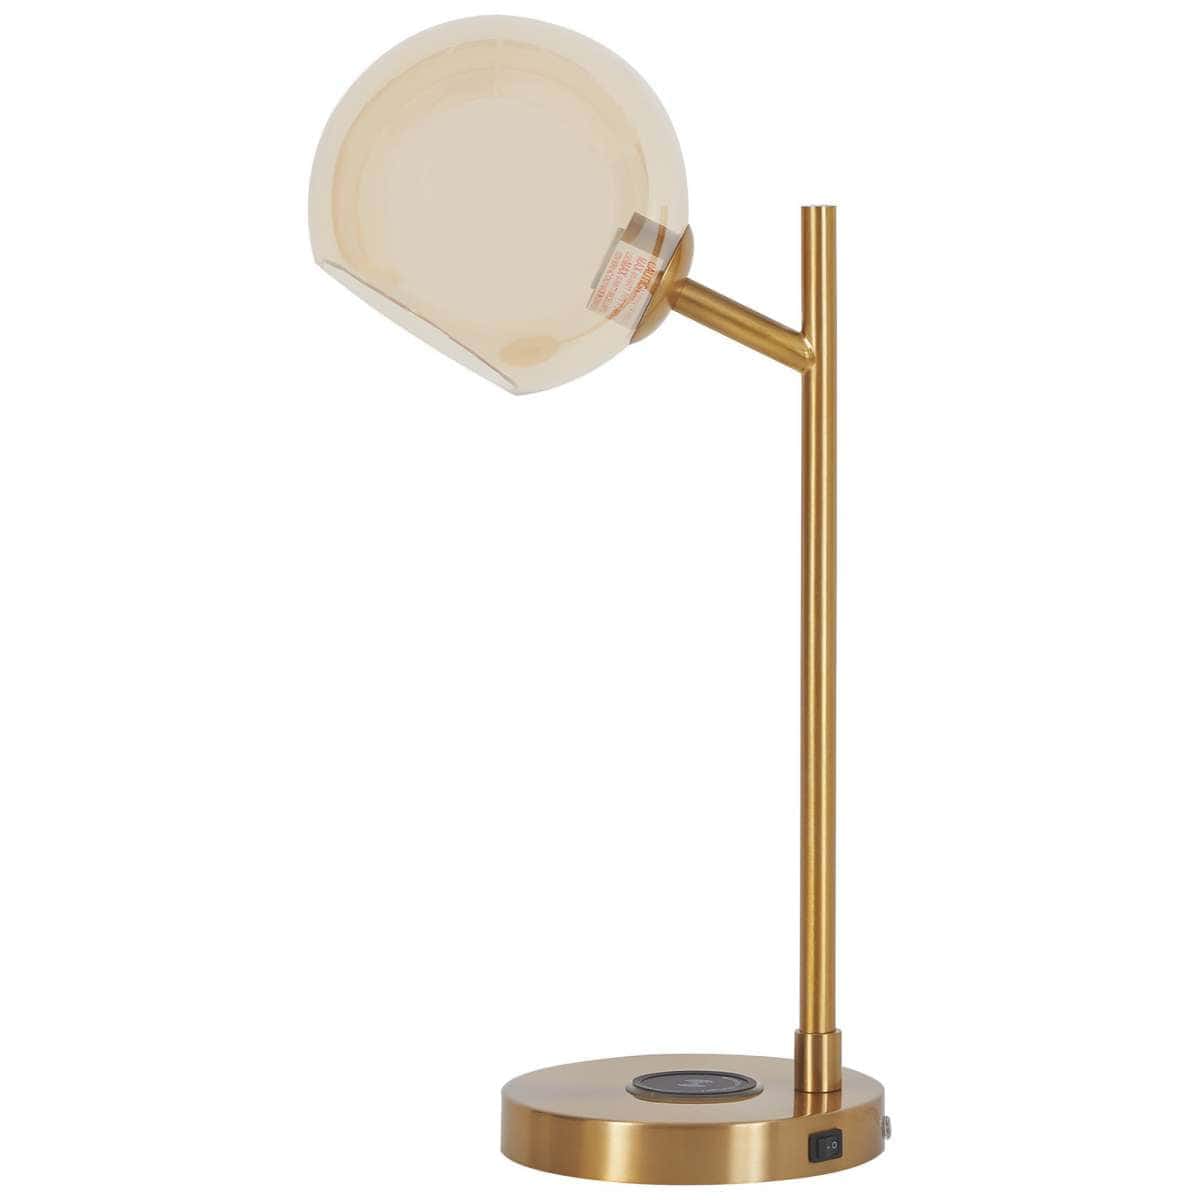 Benzara Metal Desk Lamp With Round Glass Shade And Wireless Charger, Gold By Benzara Desk Lamps BM226571